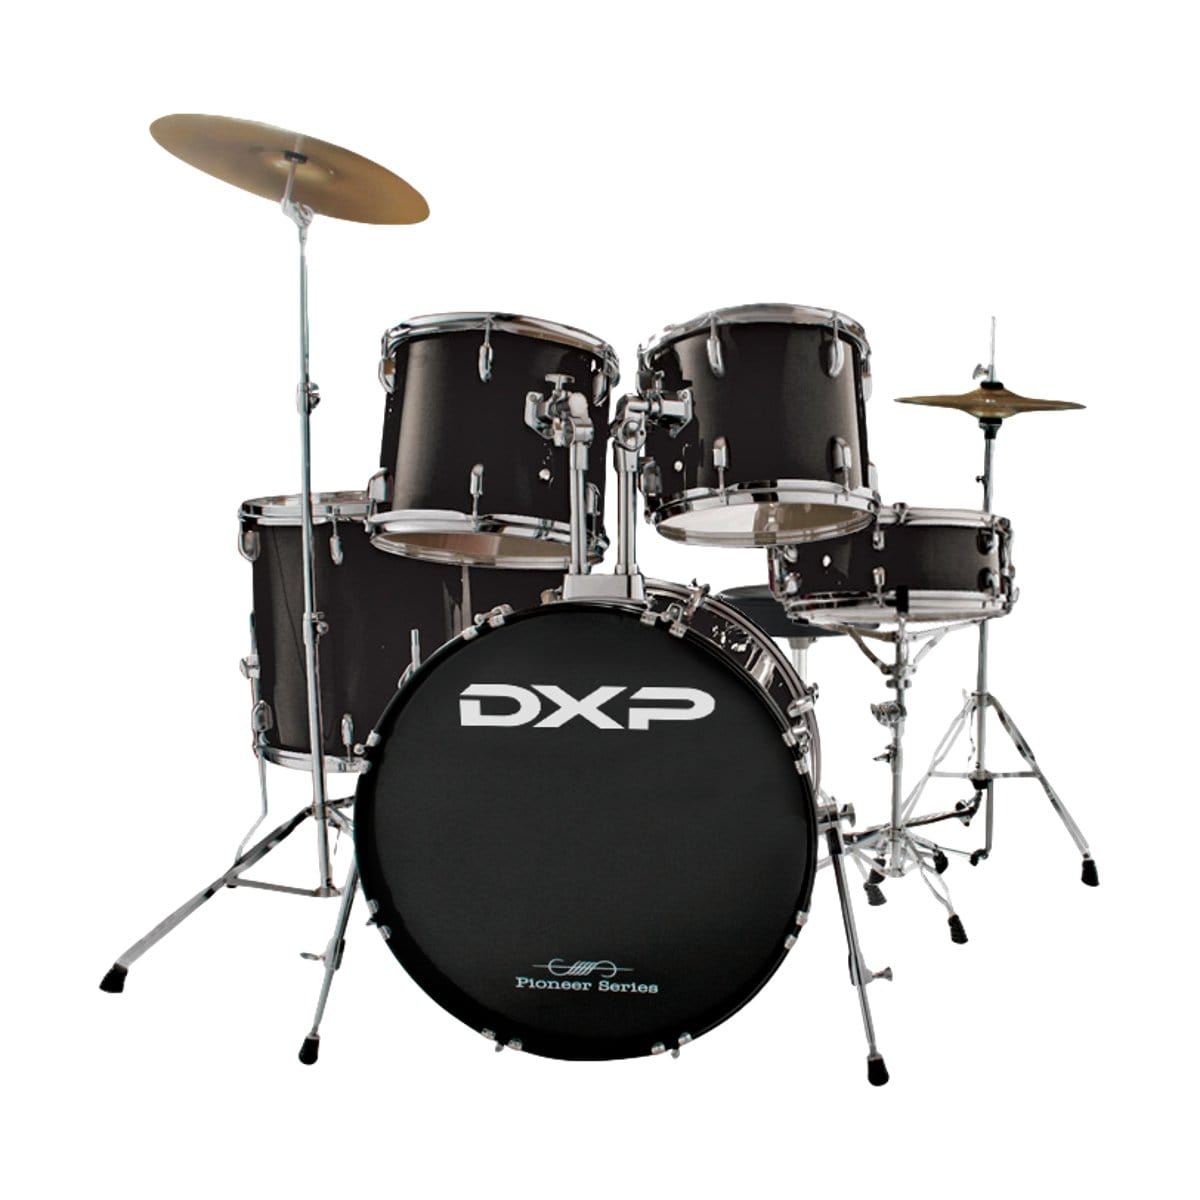 DXP Percussion DXP Pioneer Drum Kit Package with Cymbals and Stool Black TX04PB - Byron Music